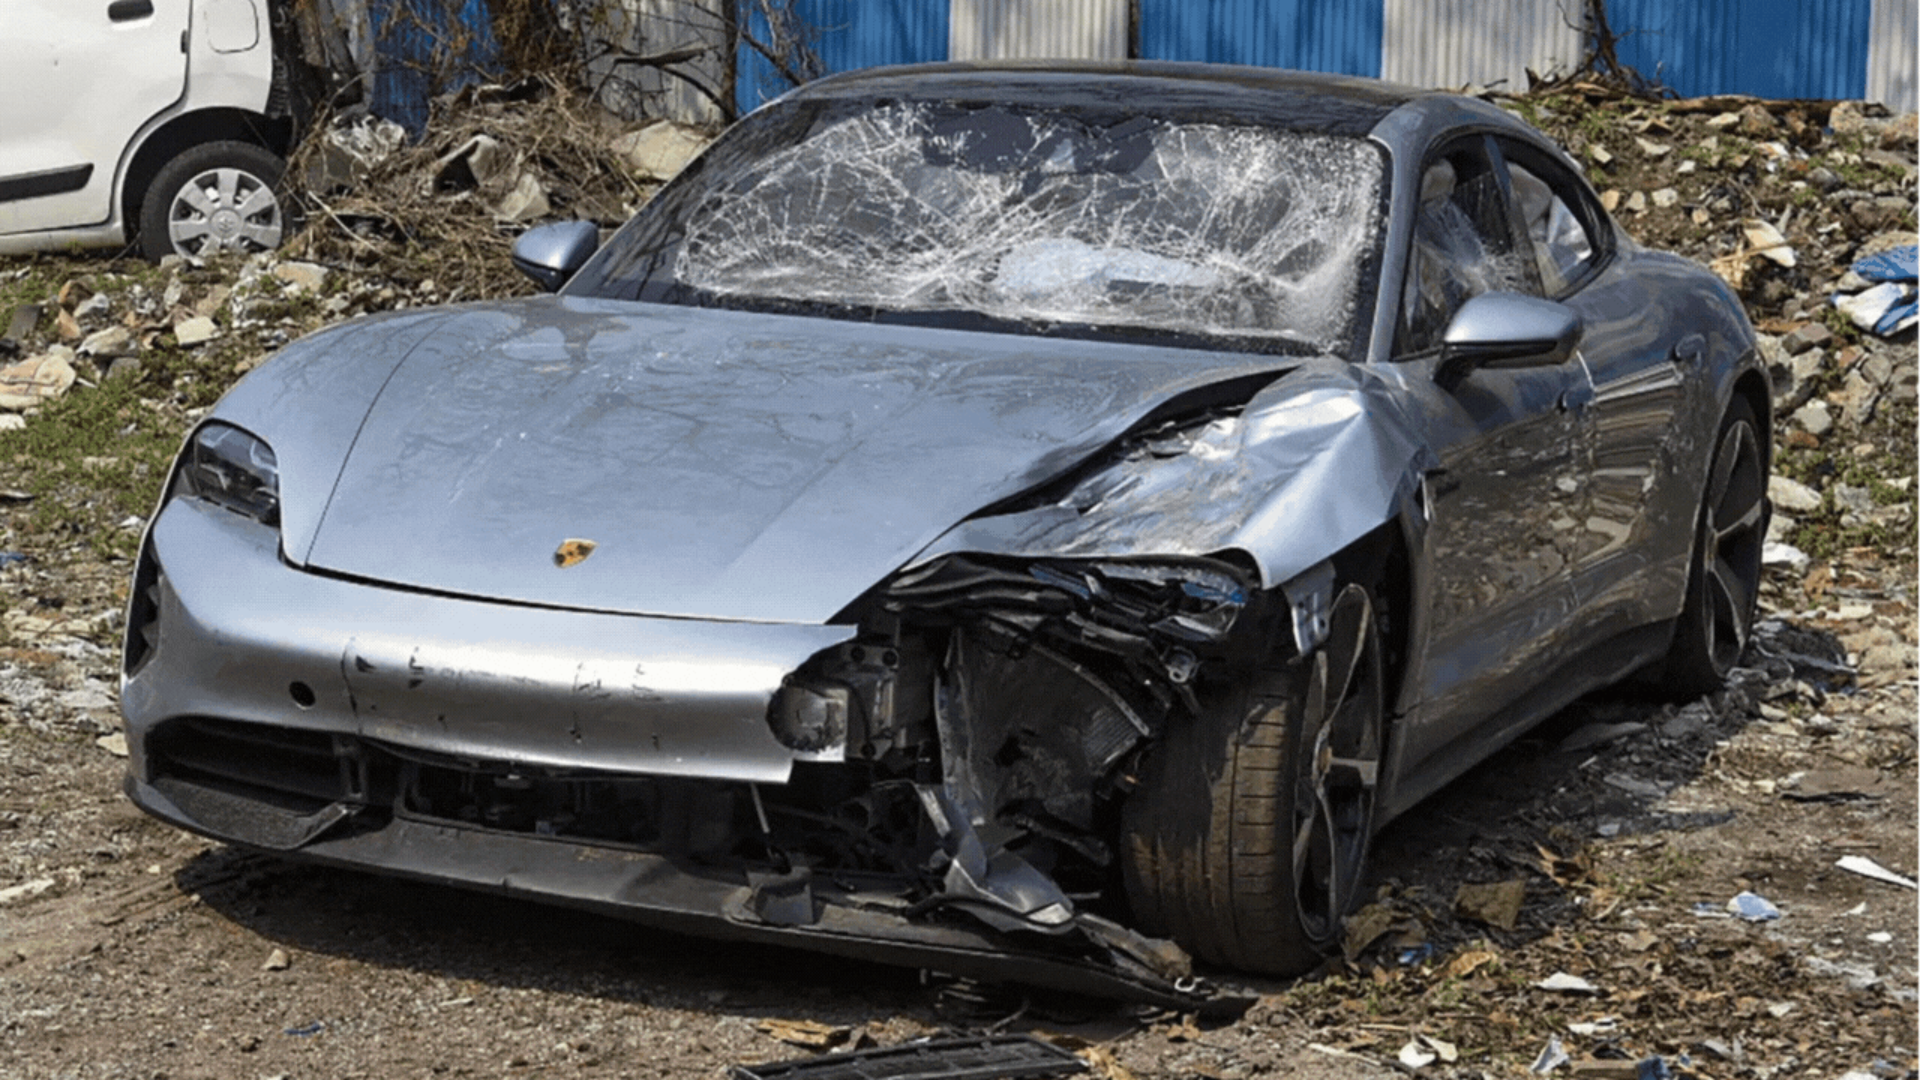 Pune Porsche Crash: Police To Investigate Officers Over Pizza And Burger Allegations